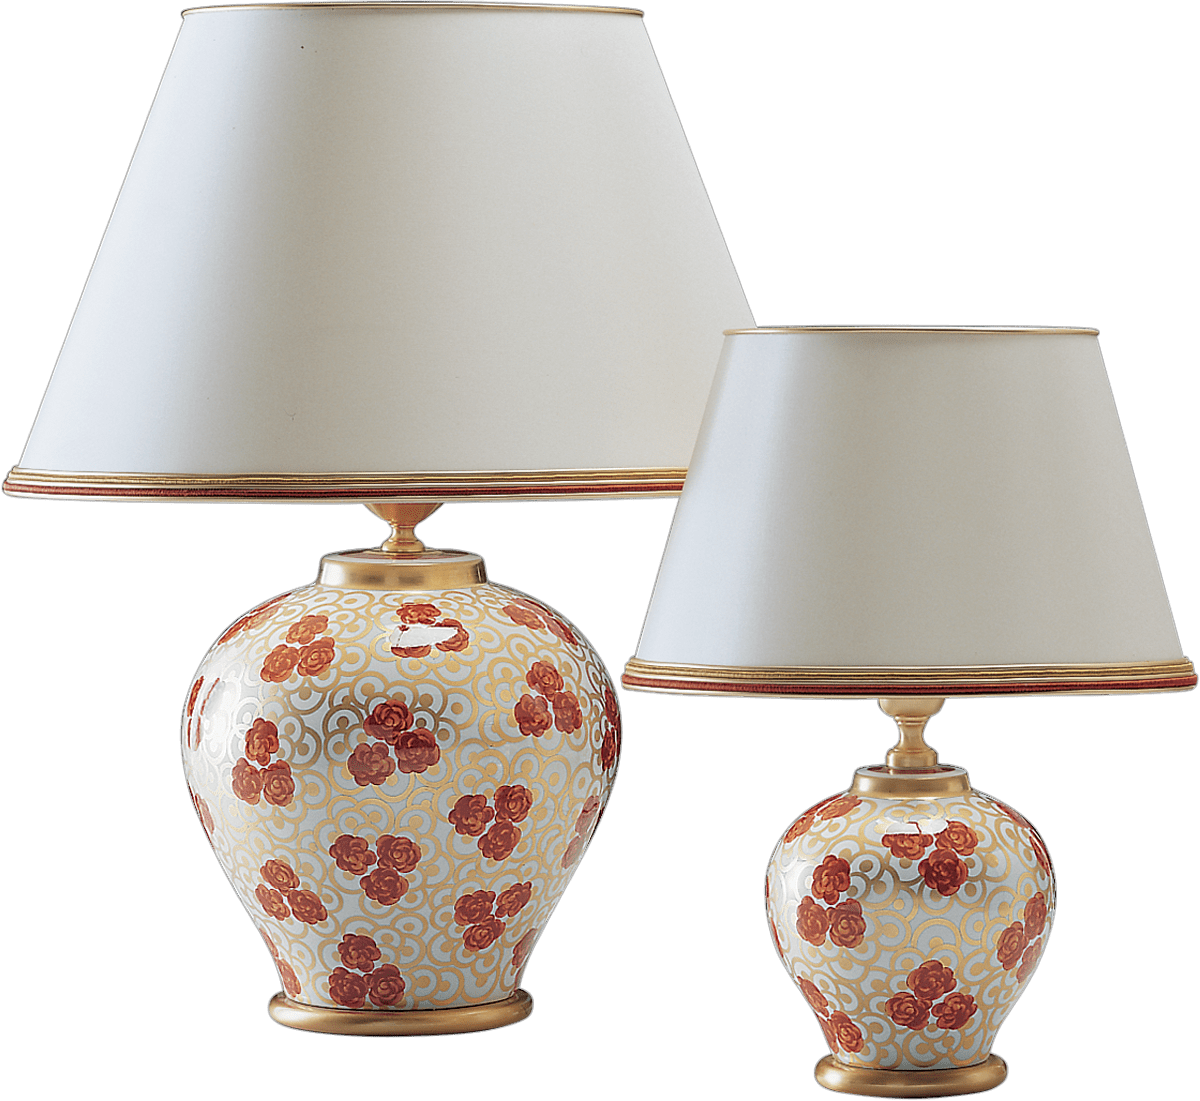 TABLE LAMP 4014